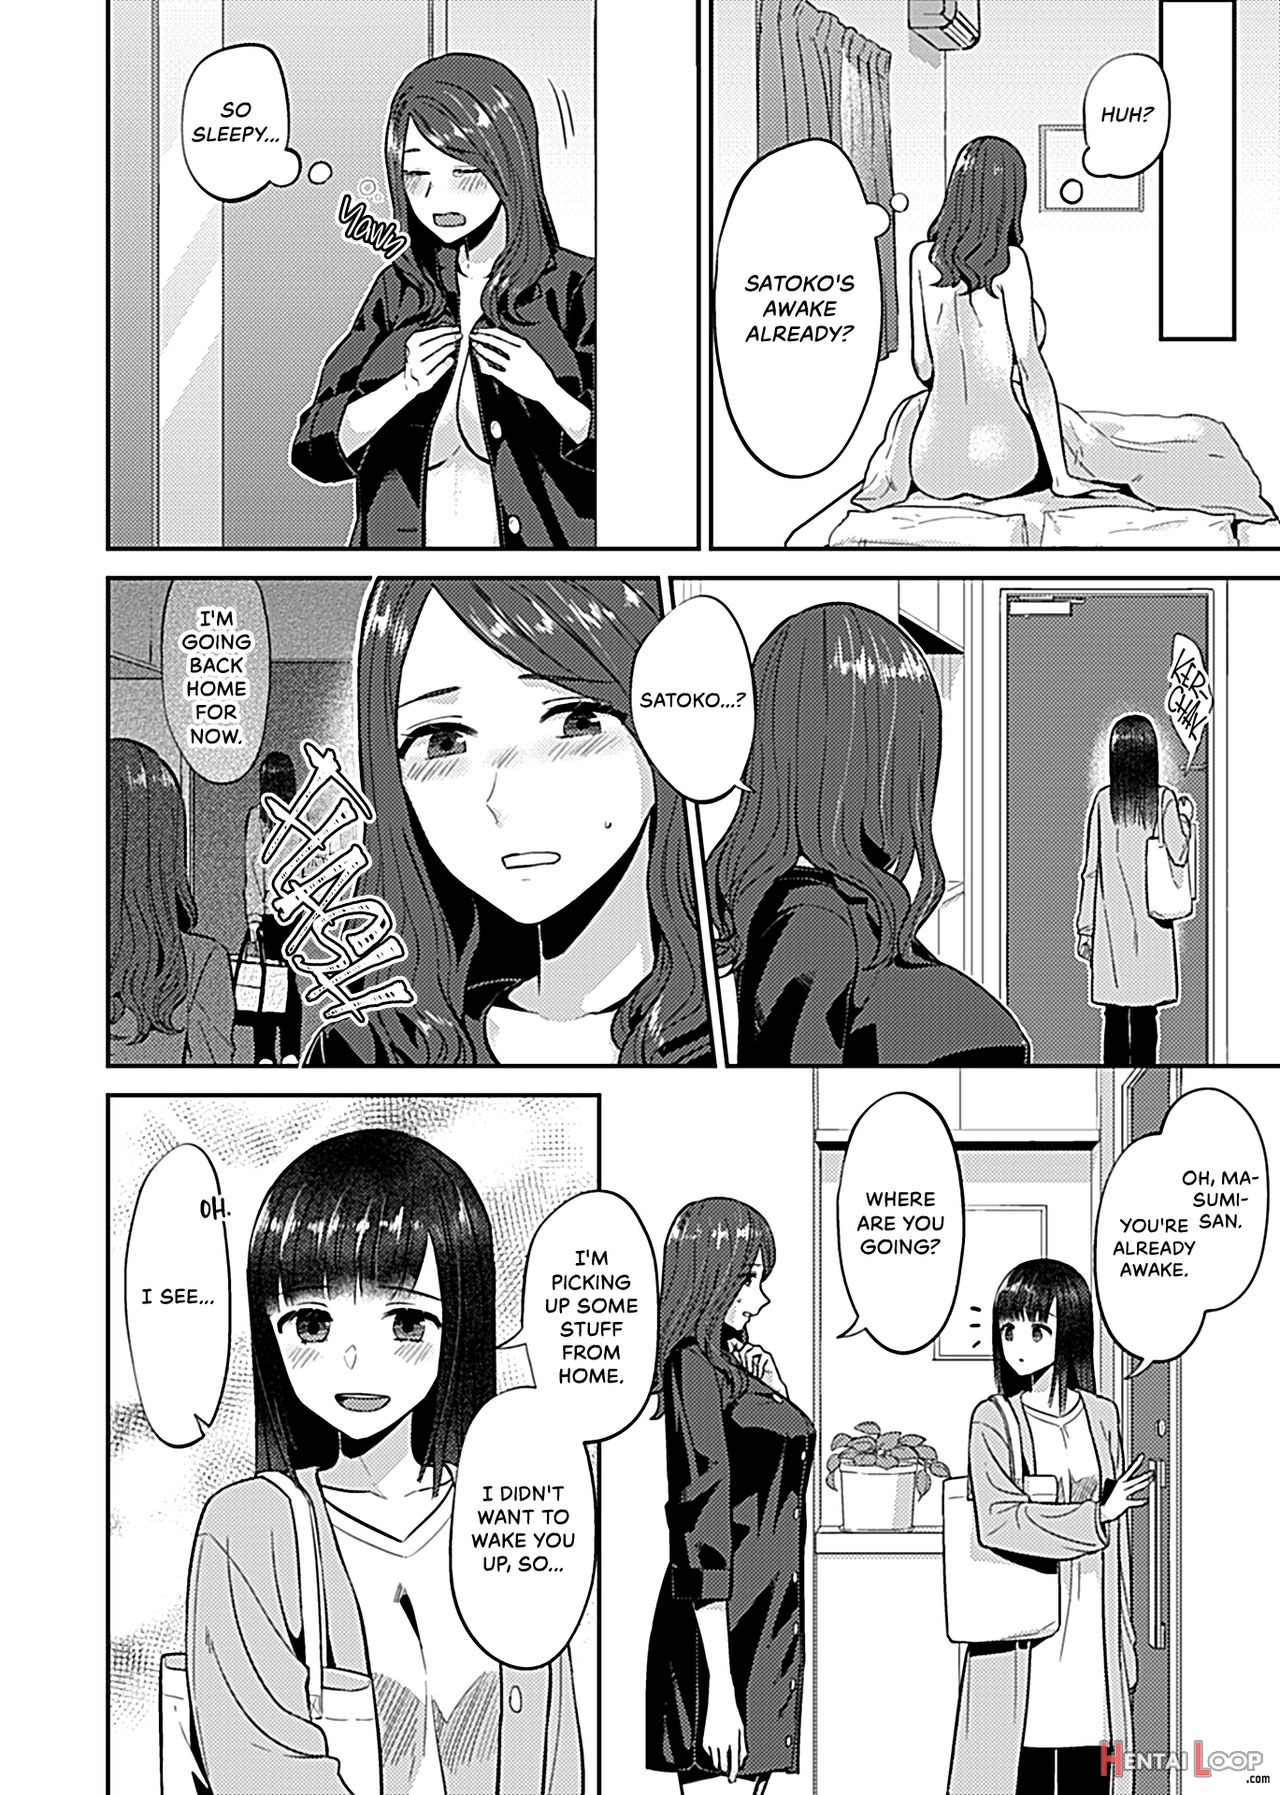 Lilies Are In Full Bloom - Volume 1 page 110